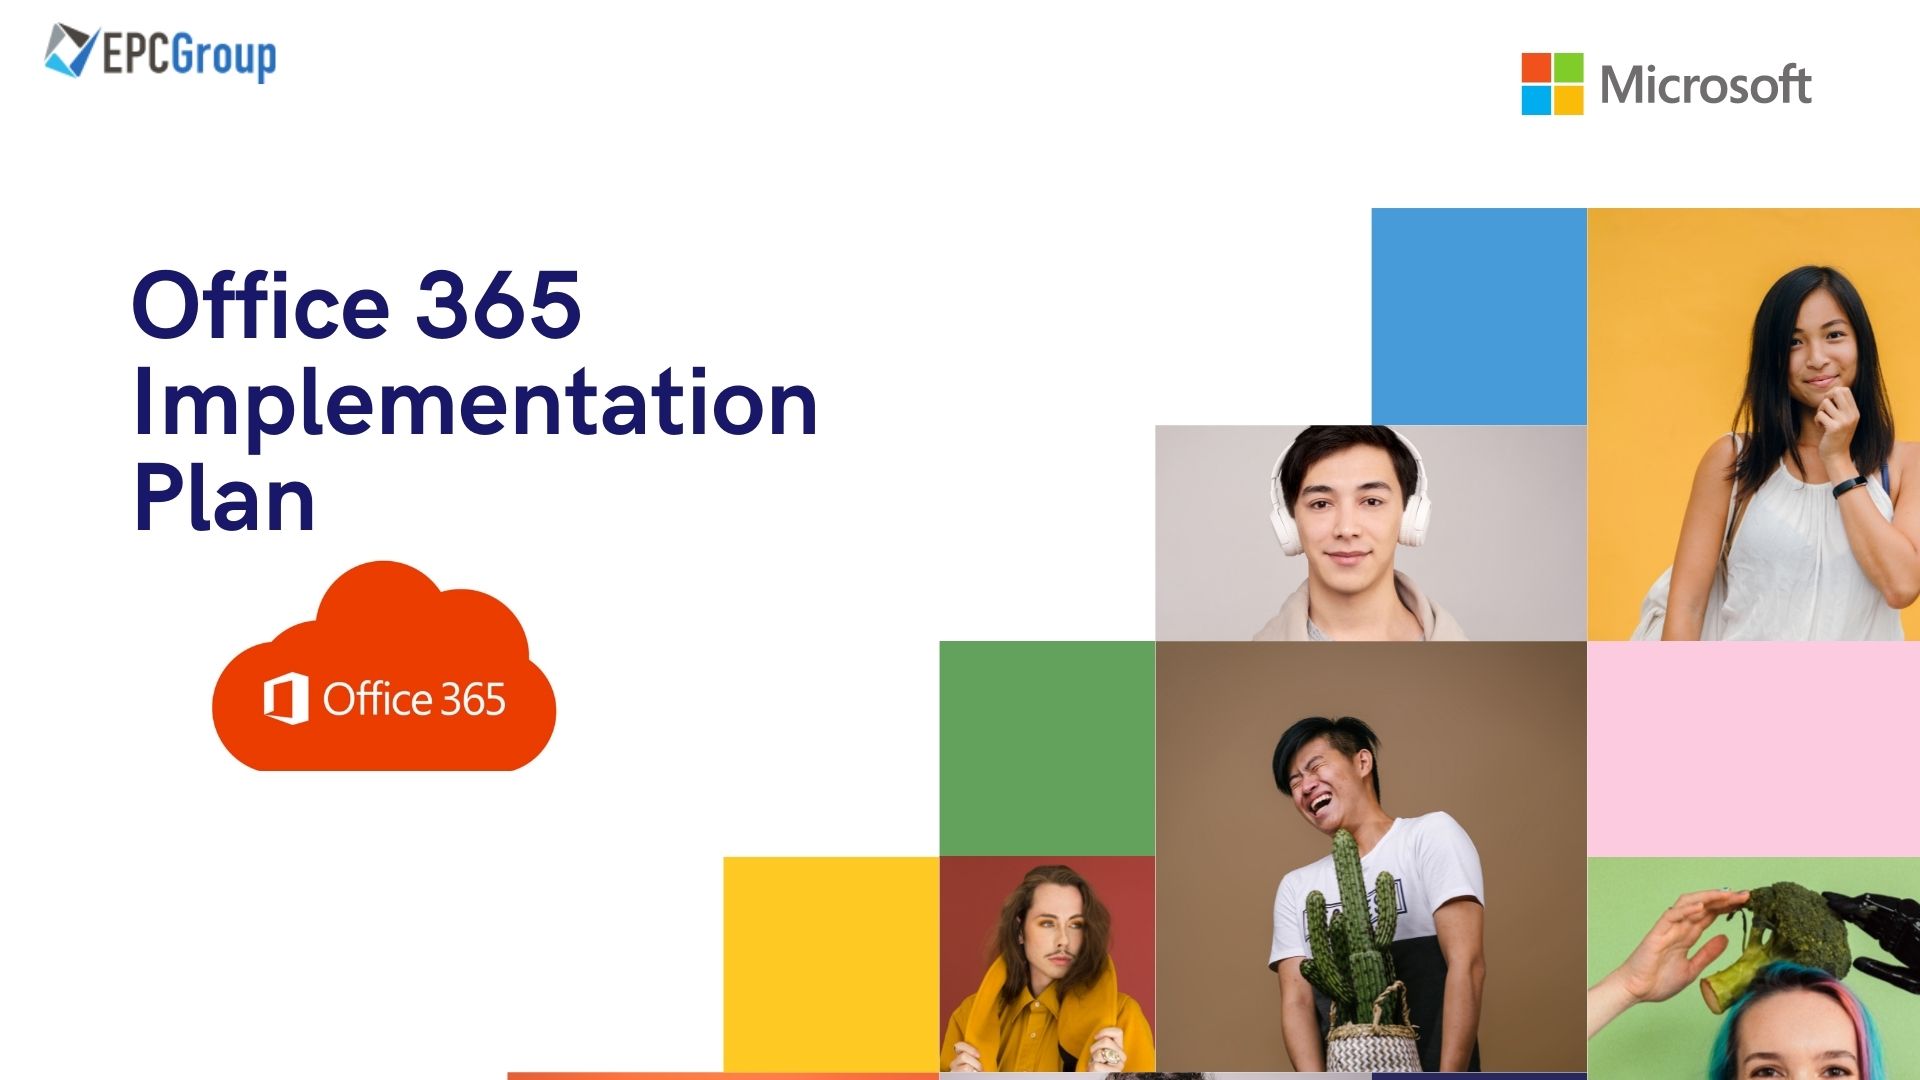 How To Plan Successful Office 365 Implementation | EPCGroup